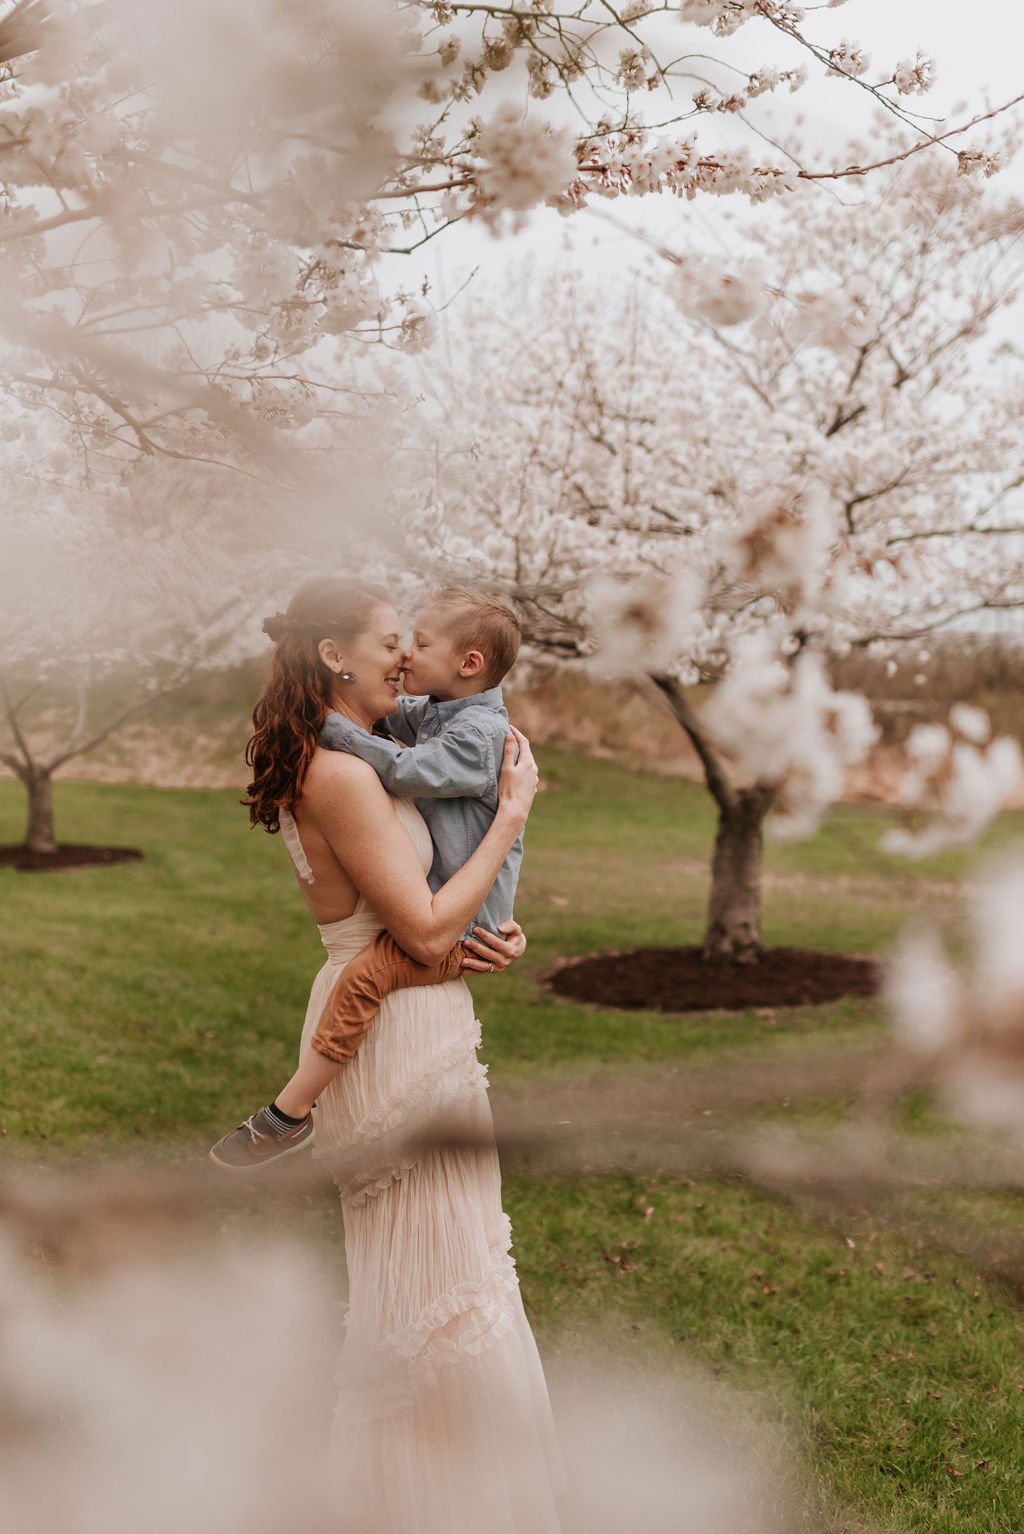 cleveland-ohio-family-mother-daughter-son-outdoor-spring-session-flower-cherry-blossoms3.jpg